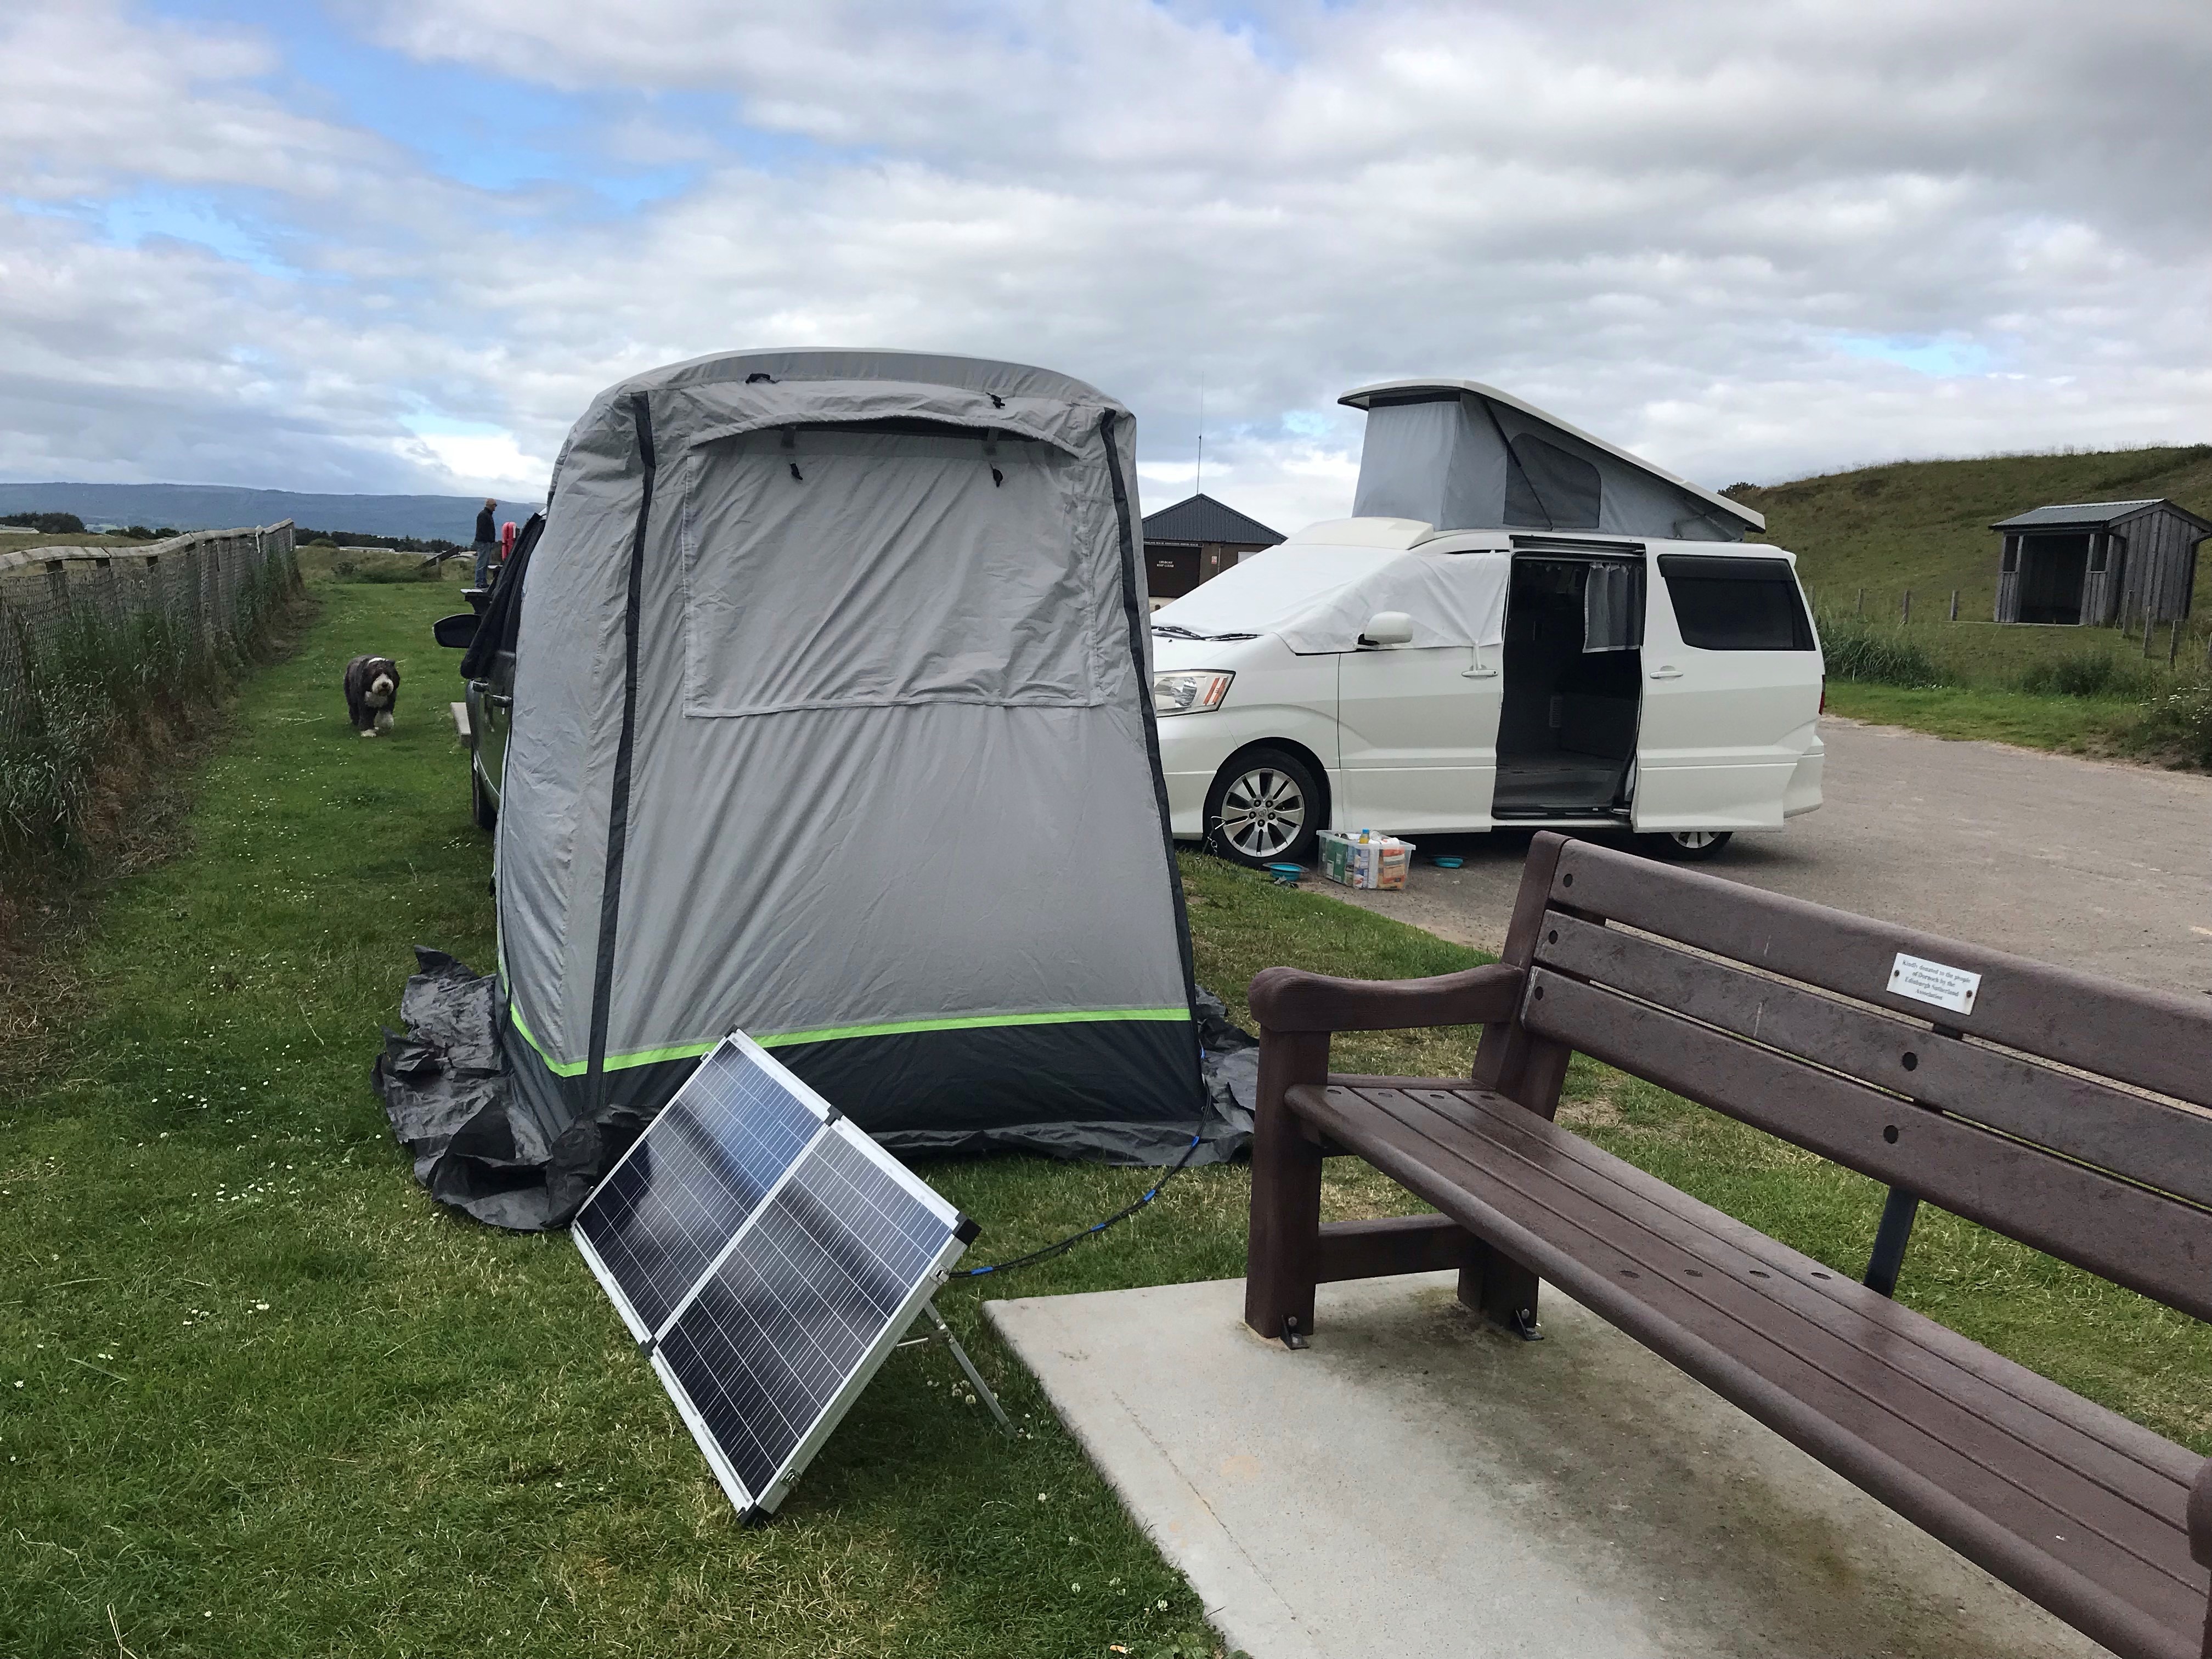 Locals are upset by campers ignoring prohibition signs to take up residence at Dornoch beach